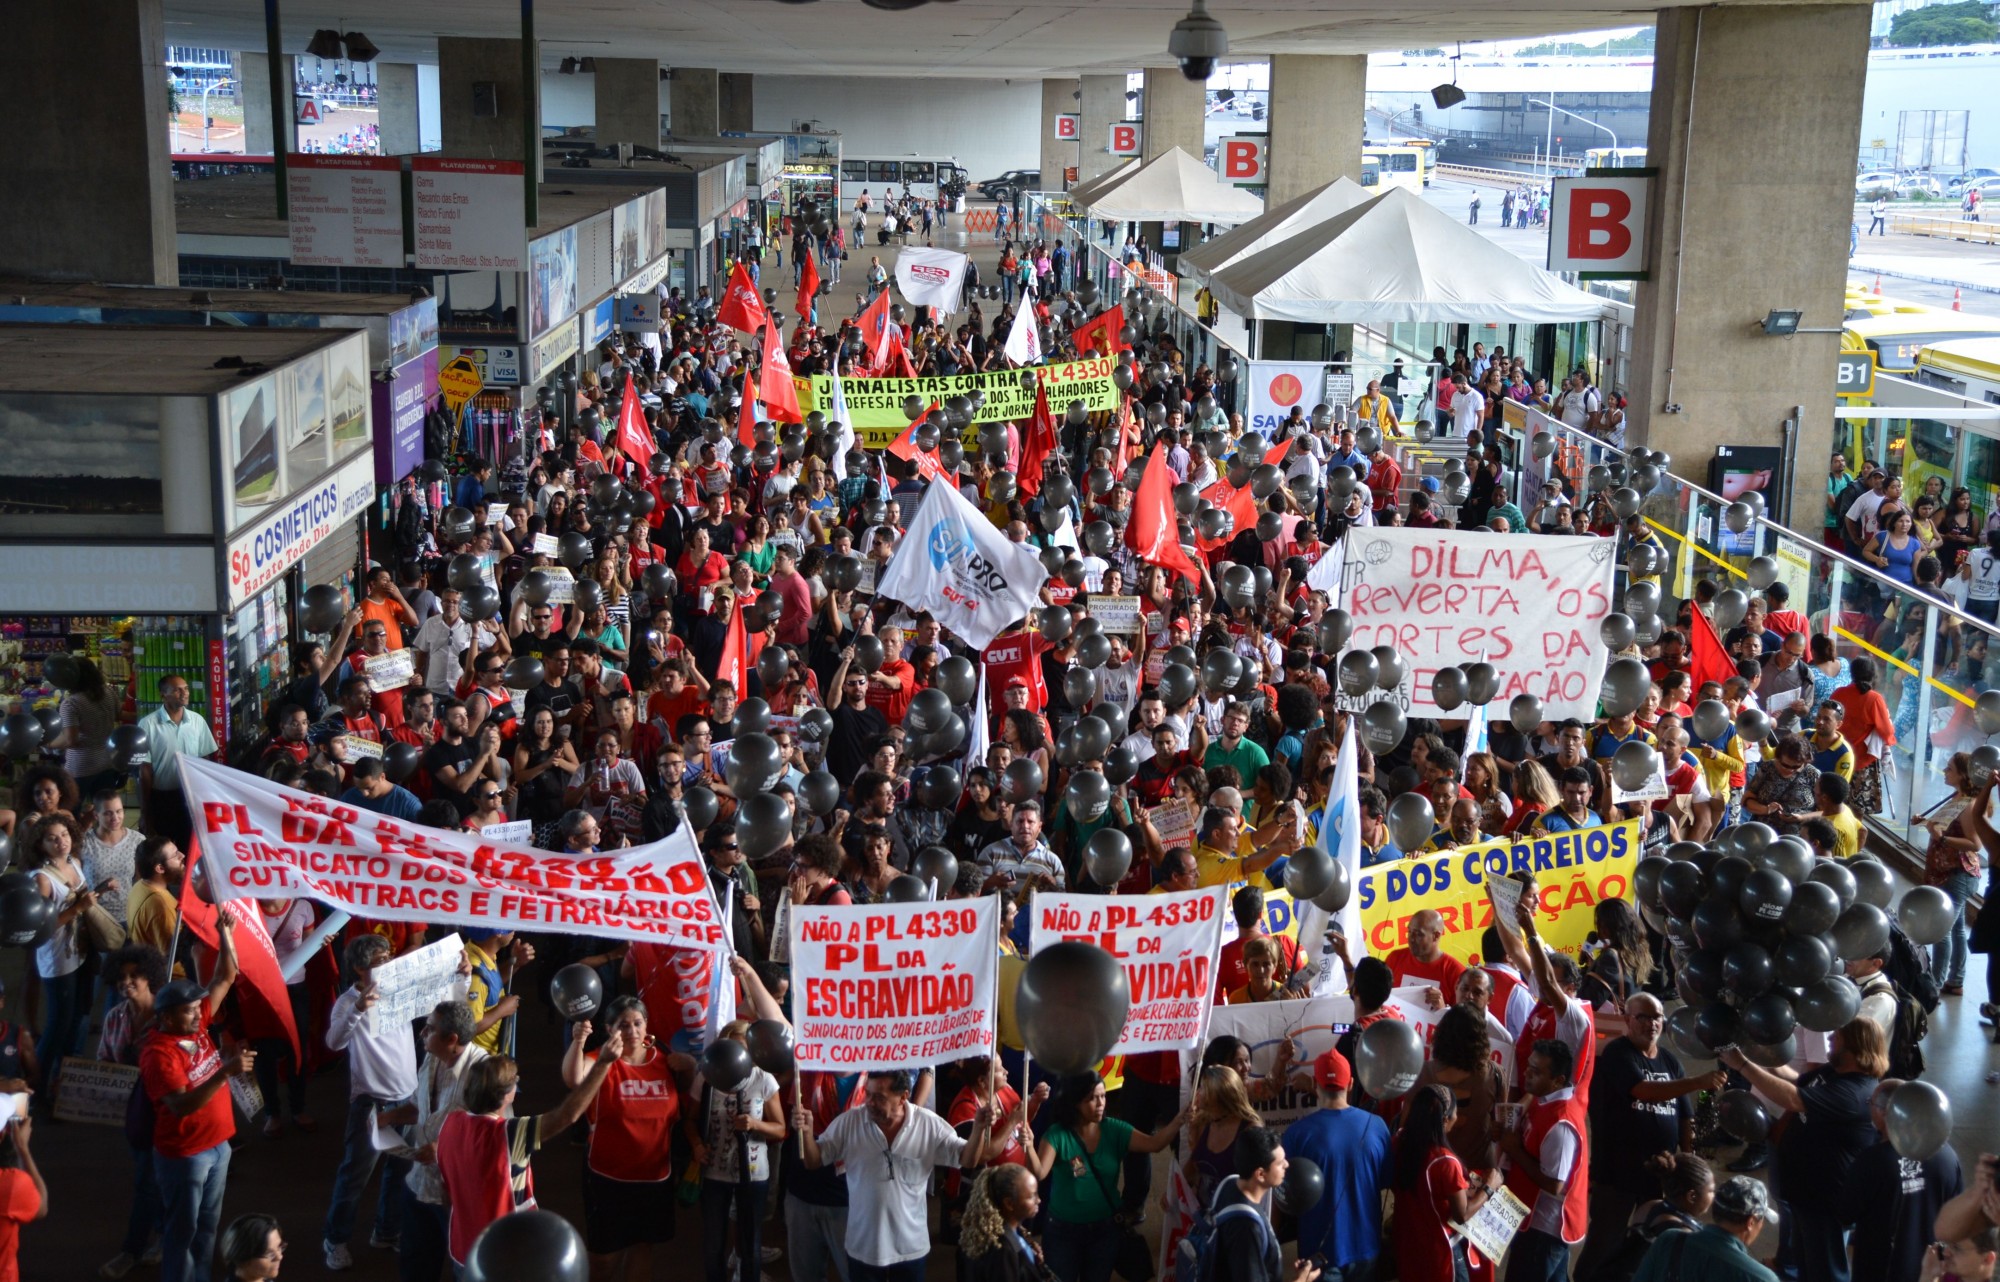 Workers’ Unions Protests Against Outsourcing Bill in Brazil